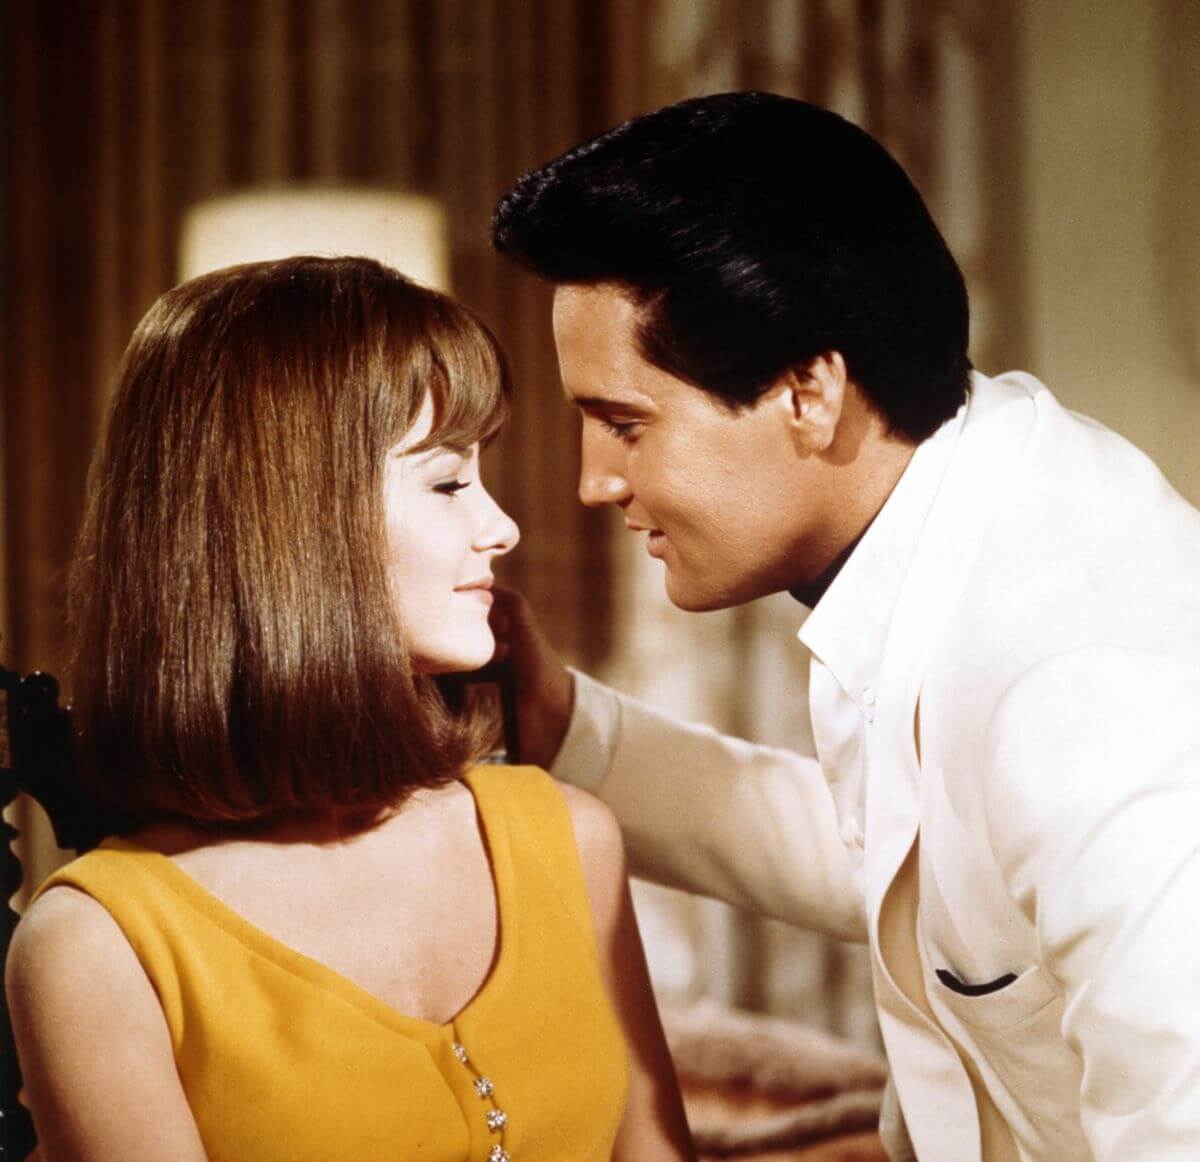 Elvis leans in toward Shelley Fabares. He wears a white shirt and she wears a yellow tank top.